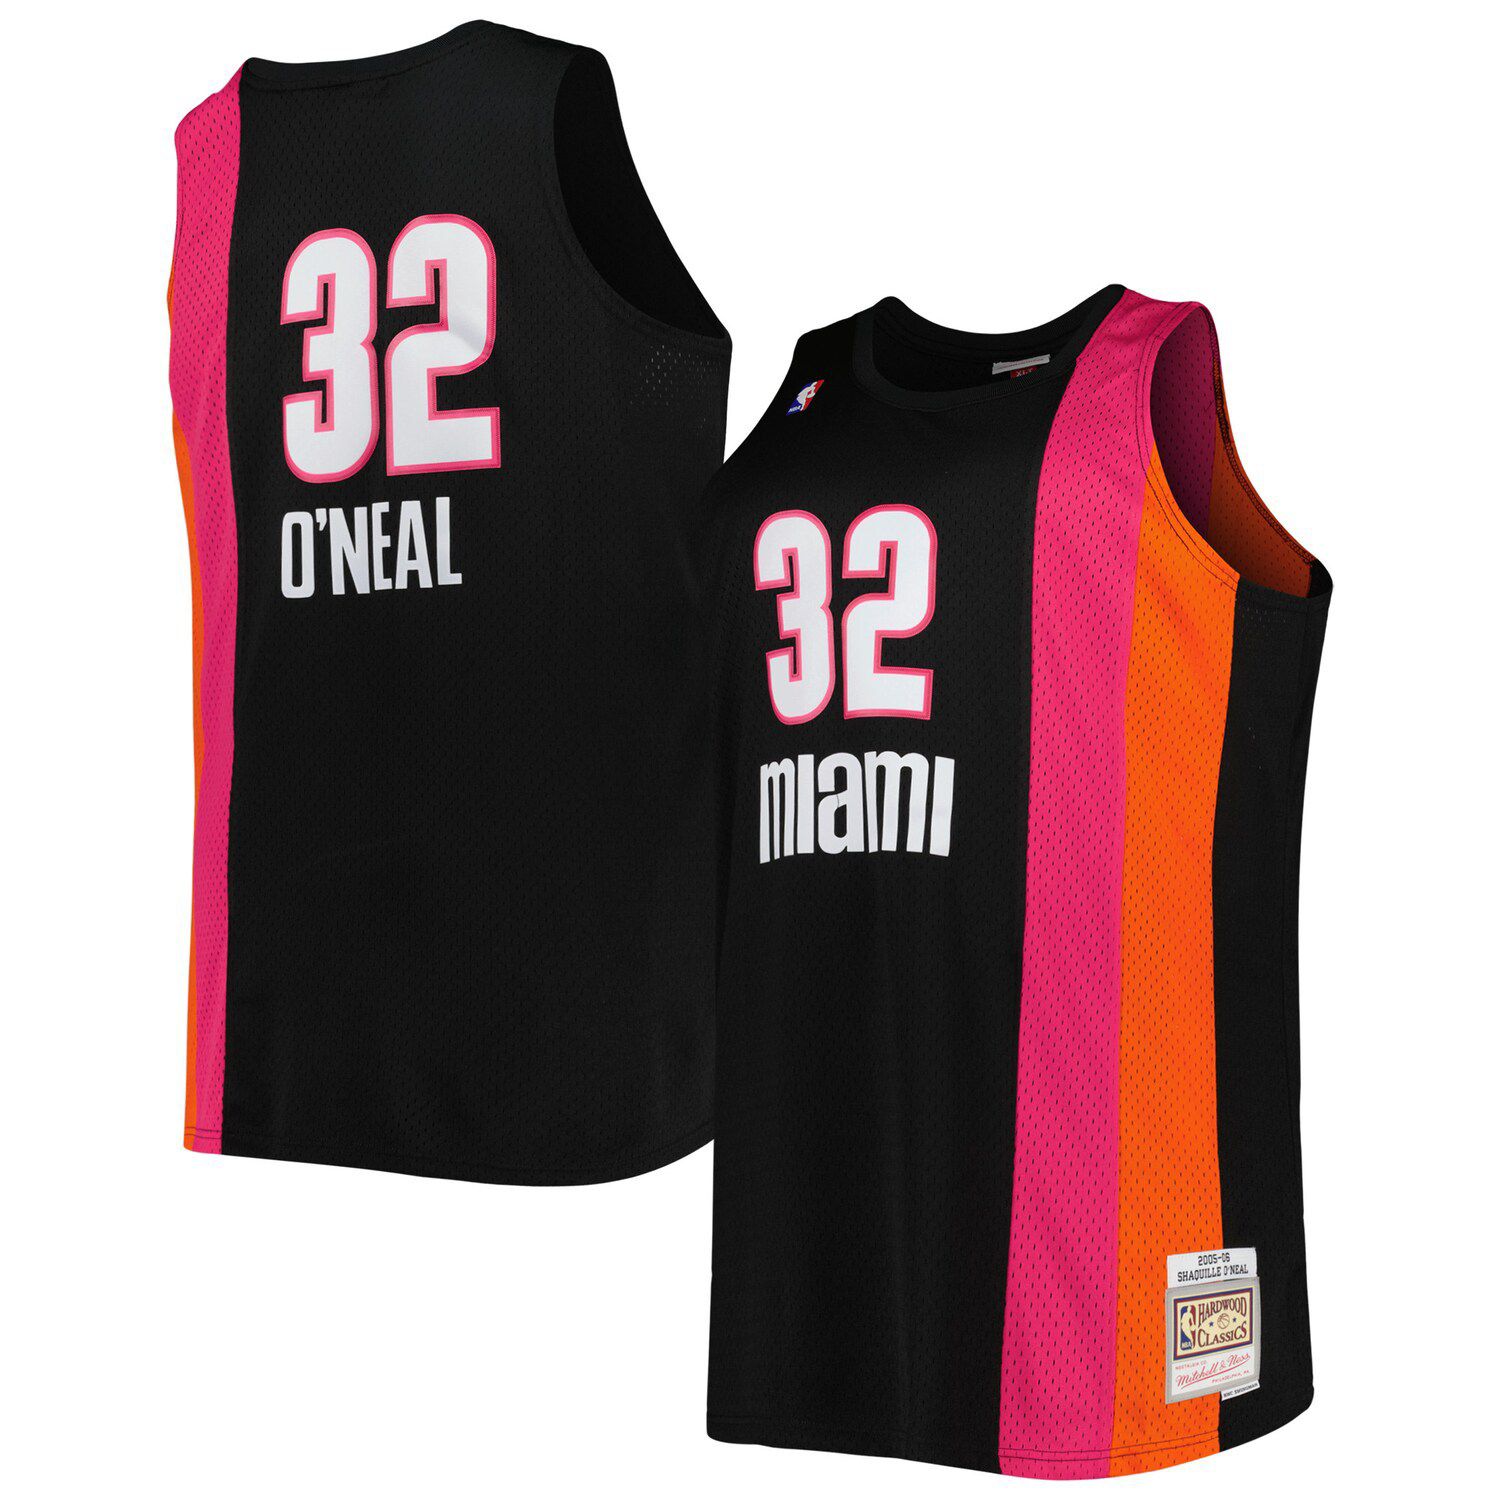 Infant Mitchell & Ness Shaquille O'Neal Black Miami Heat 2005/06 Hardwood Classics Retired Player Jersey